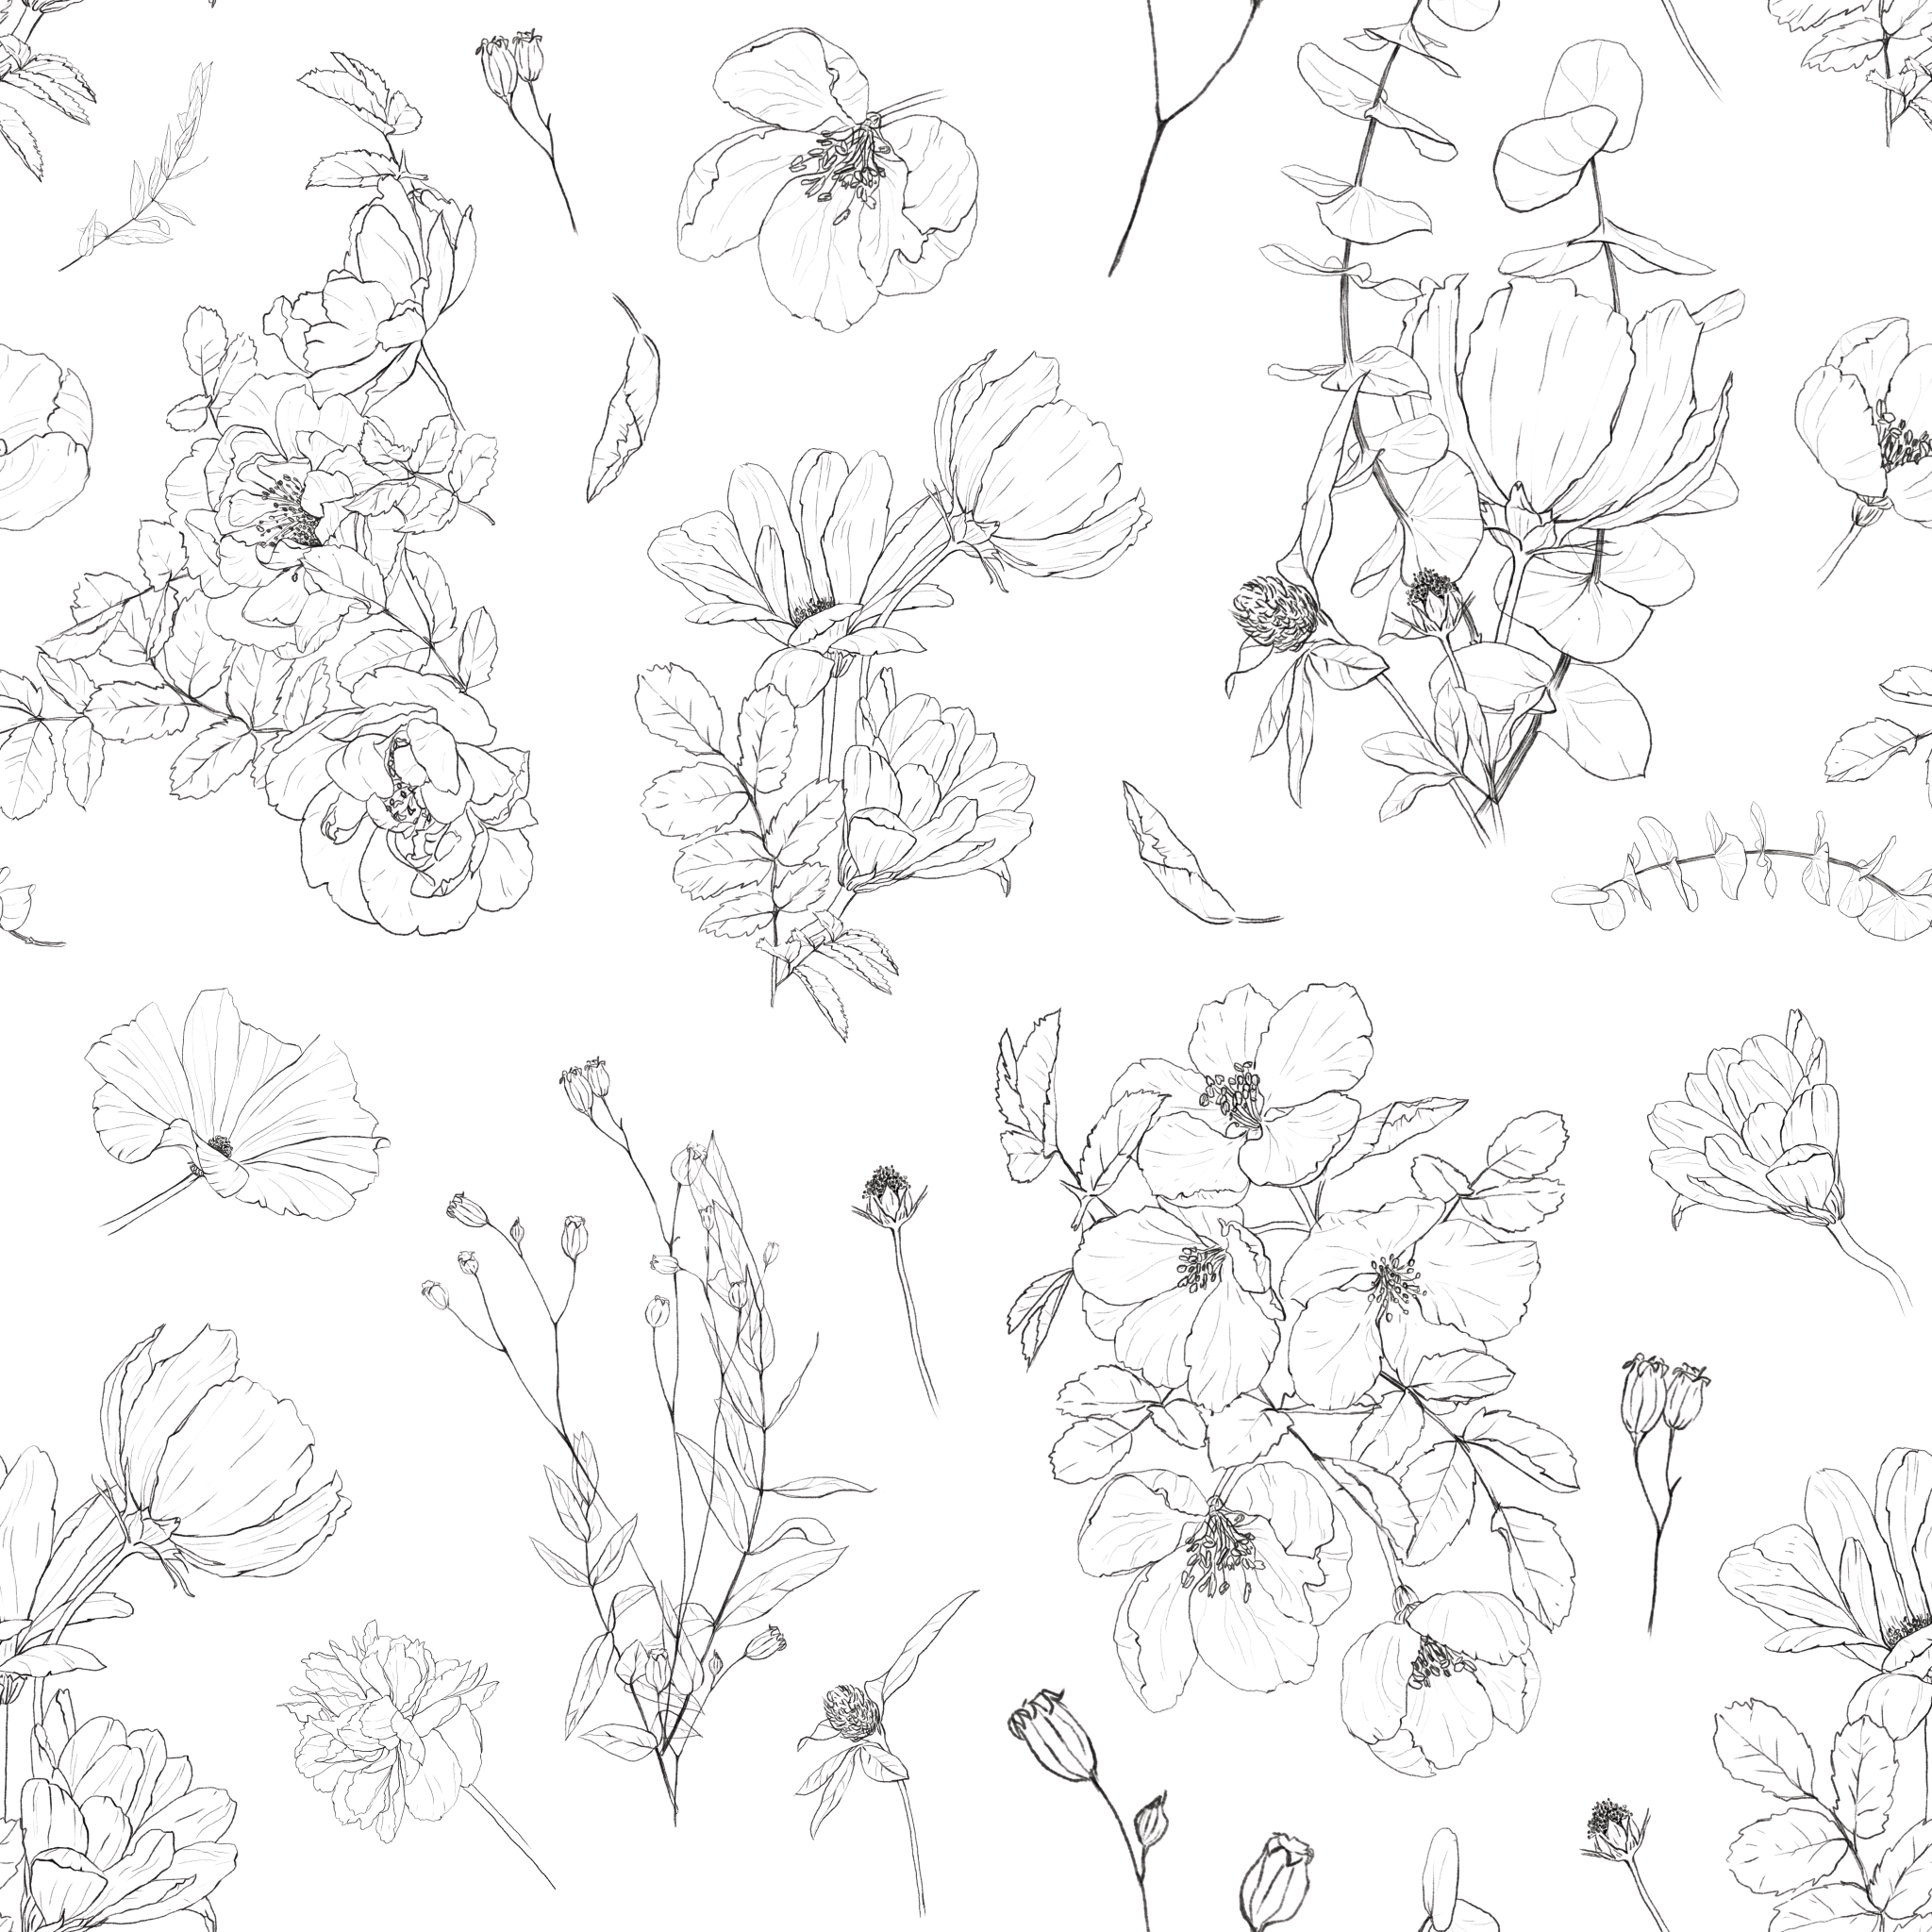 Close-up of 'Wildflower Sketch Wallpaper' detailing the delicate lines and details of various wildflowers and leaves in a seamless hand-drawn sketch pattern, creating a sophisticated and naturalistic black and white illustration.